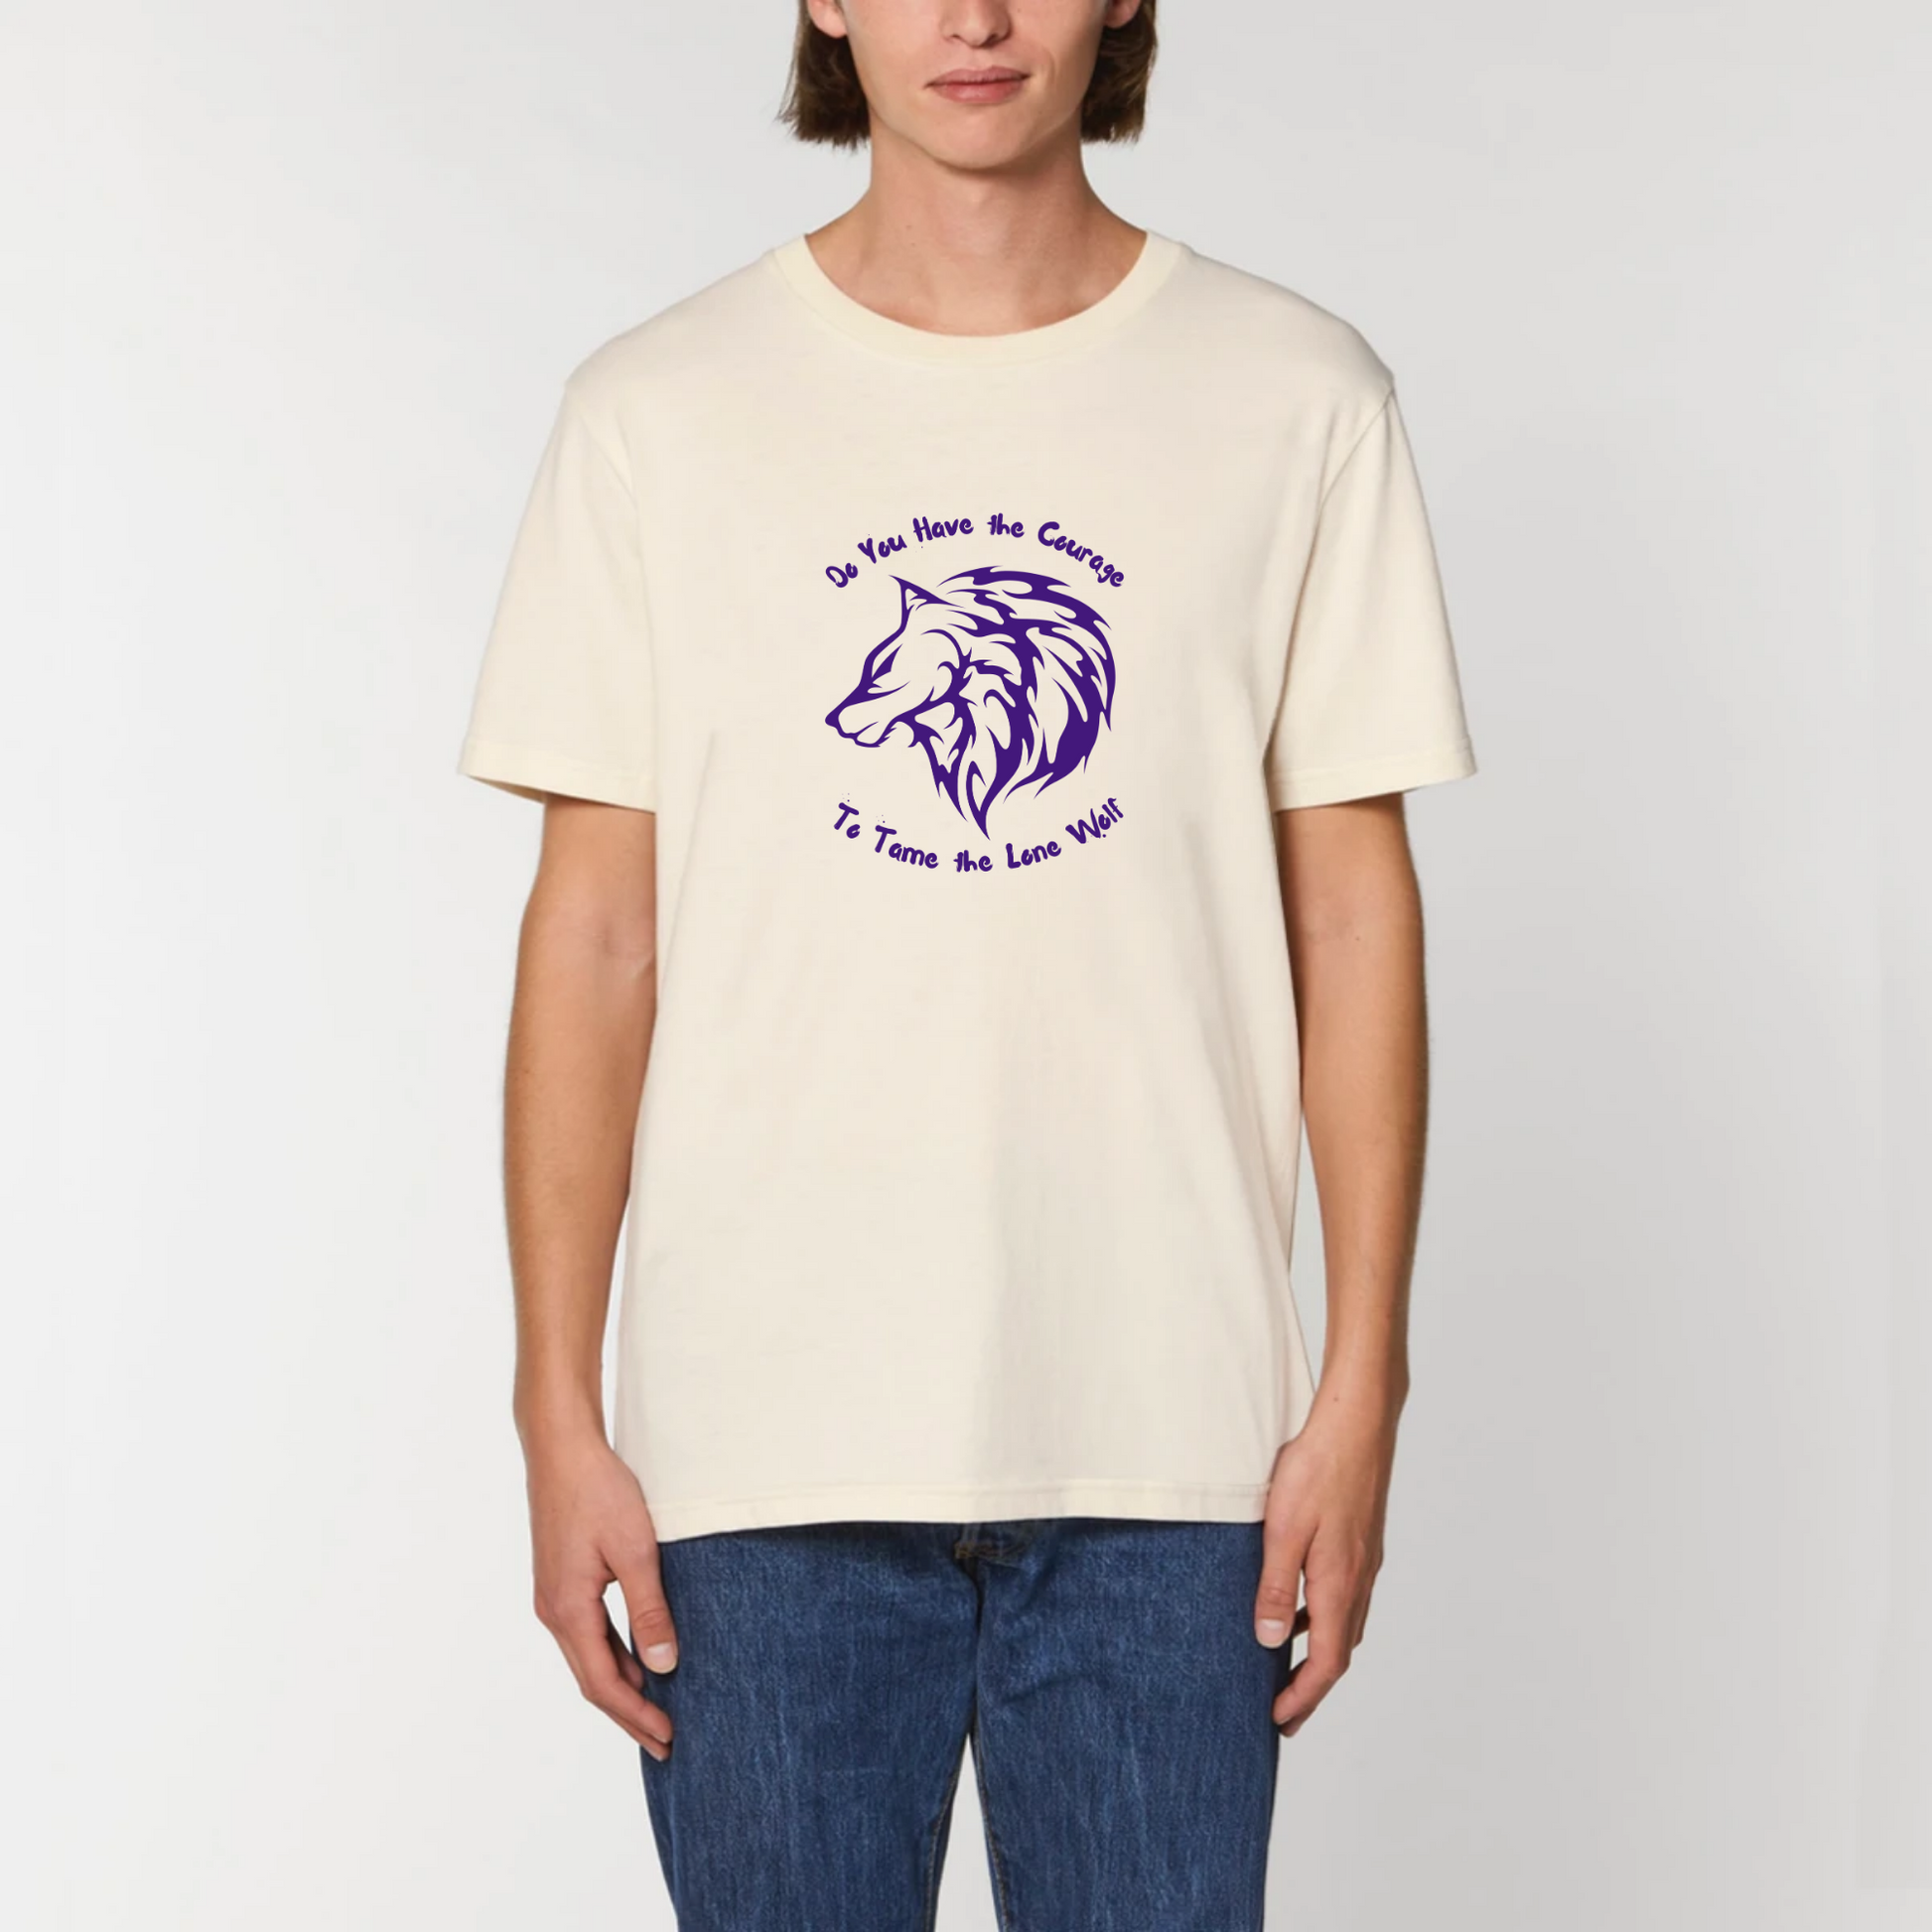 Graphic design t-shirt for men which features the head of a lone male wolf with the words "Do You Have the Courage to Tame the Lone Wolf". The t-shirt is natural